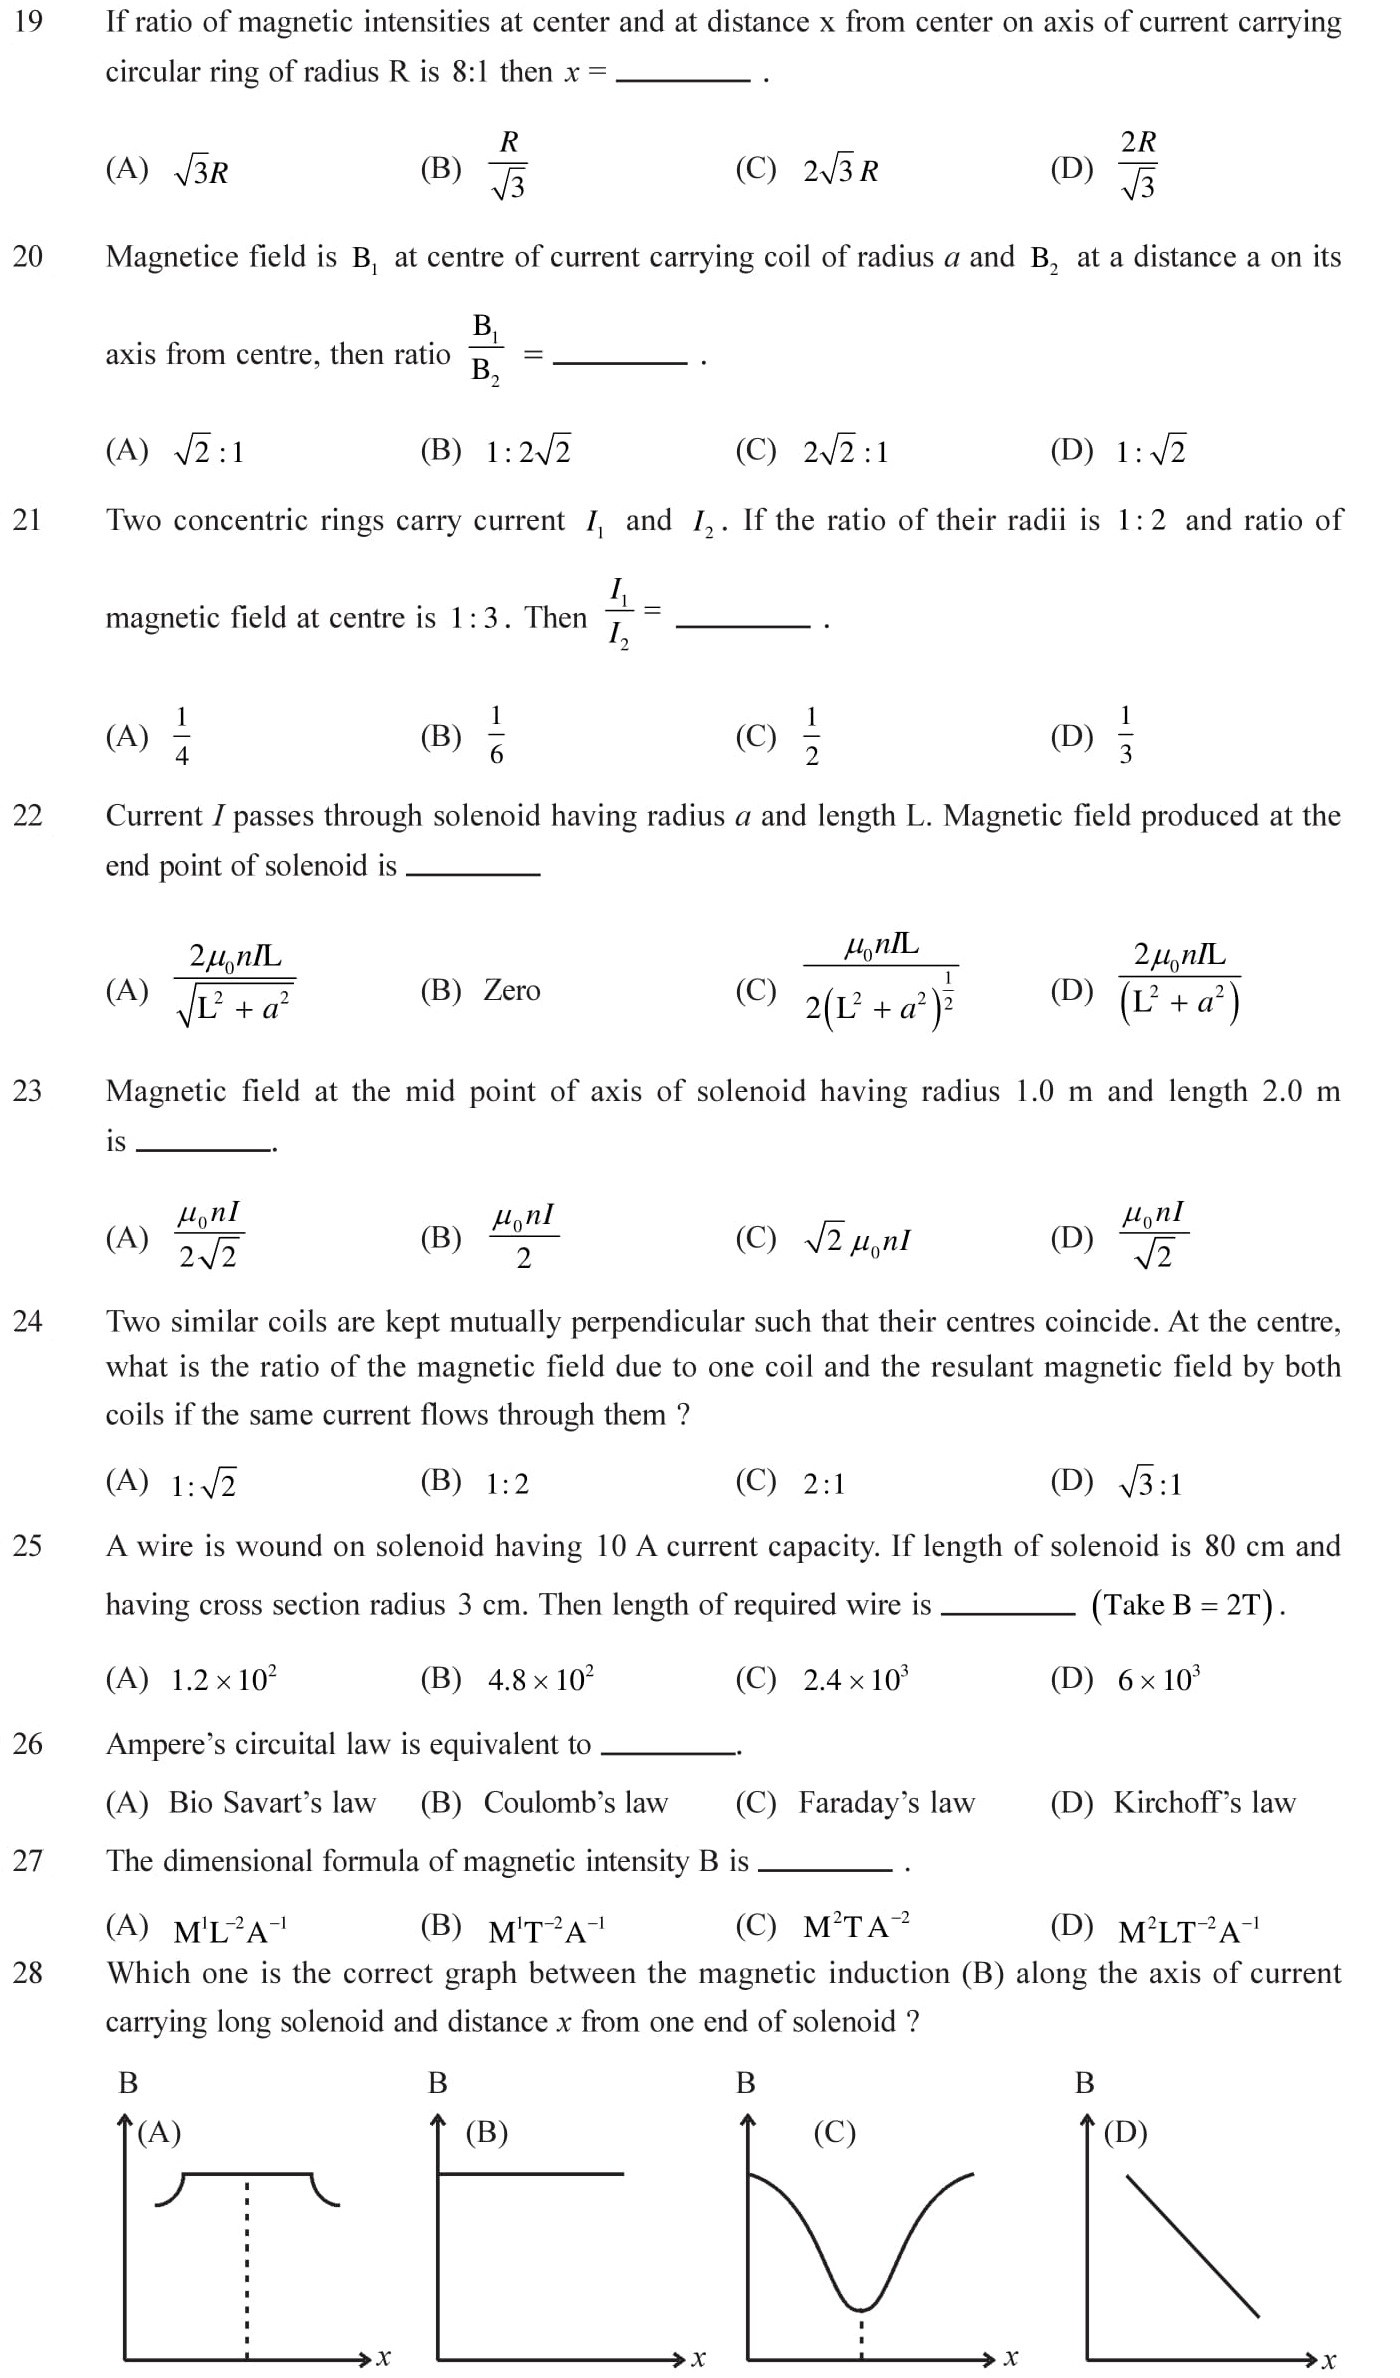 12-Physics-Moving-Charges-Magnetism-NEET-JEE-IIT-Questions-Topic-5